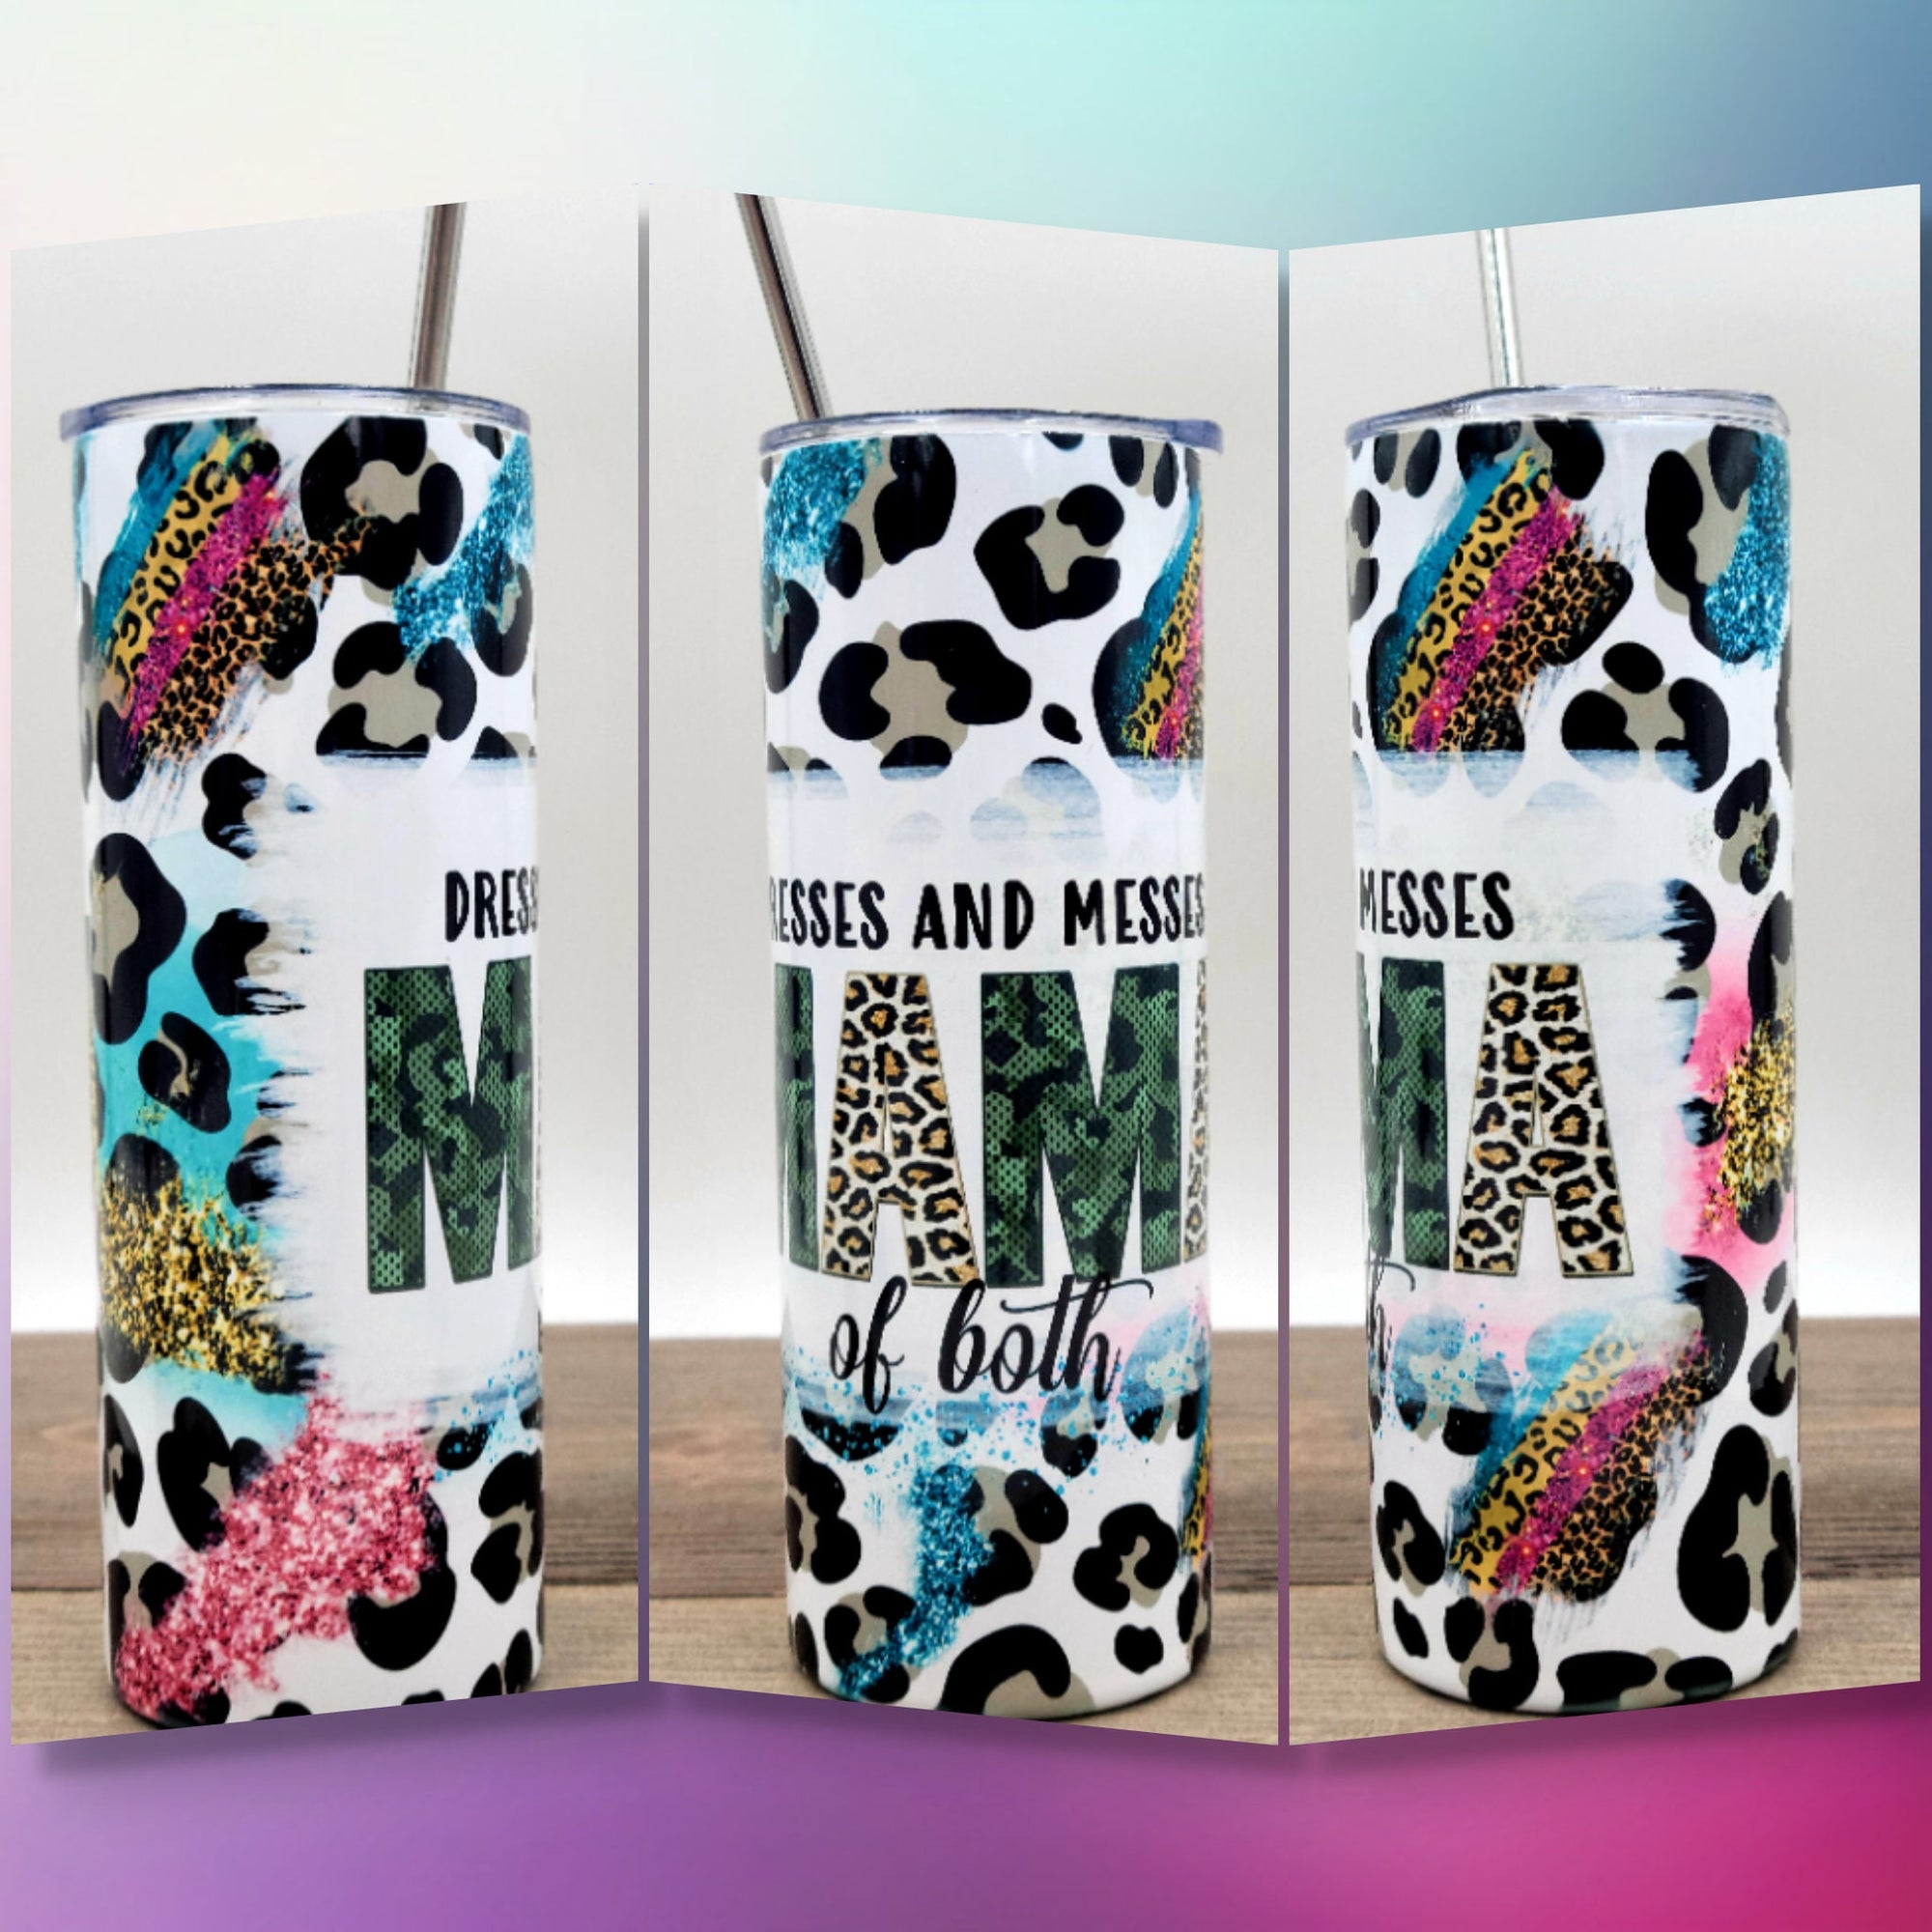 Mom Tumbler Dresses And Messes Mama Of Both Tumbler, Funny Mama Mug, Leopard And Camo Pattern Tumbler, Gift For Mom, Mothers